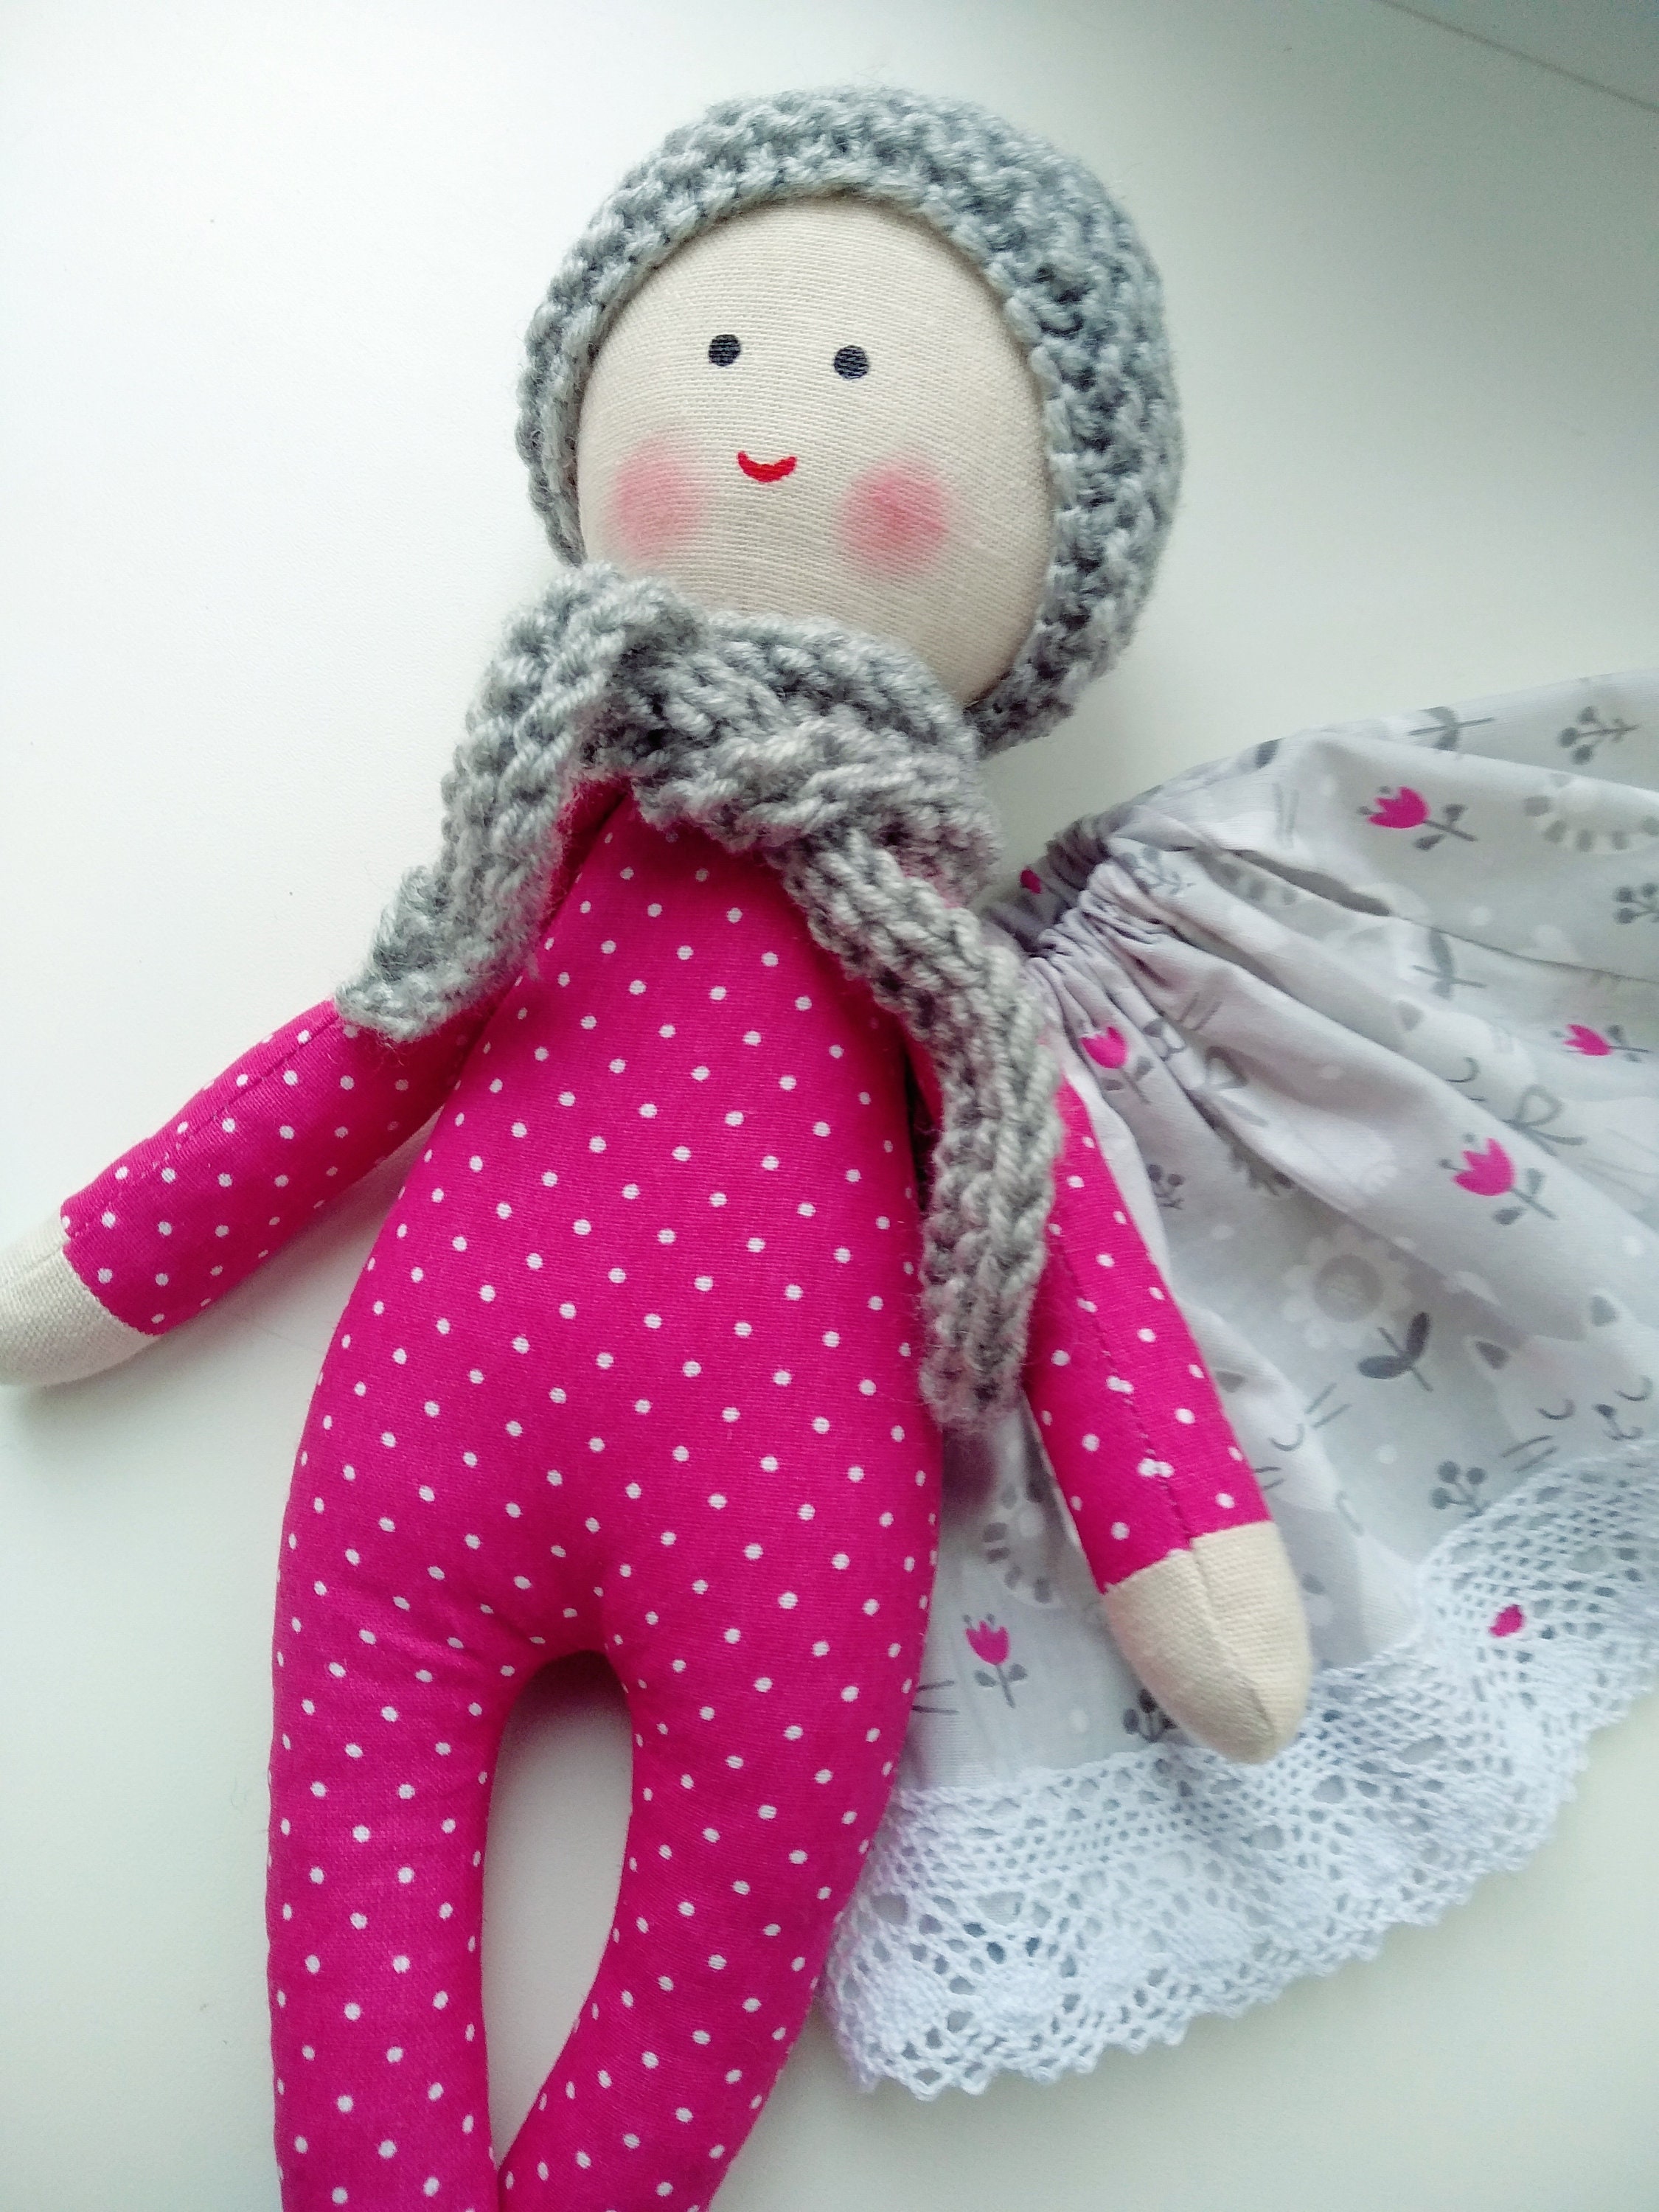 Baby's First Doll for Girl Rag Doll for Baby With Gray Hat | Etsy